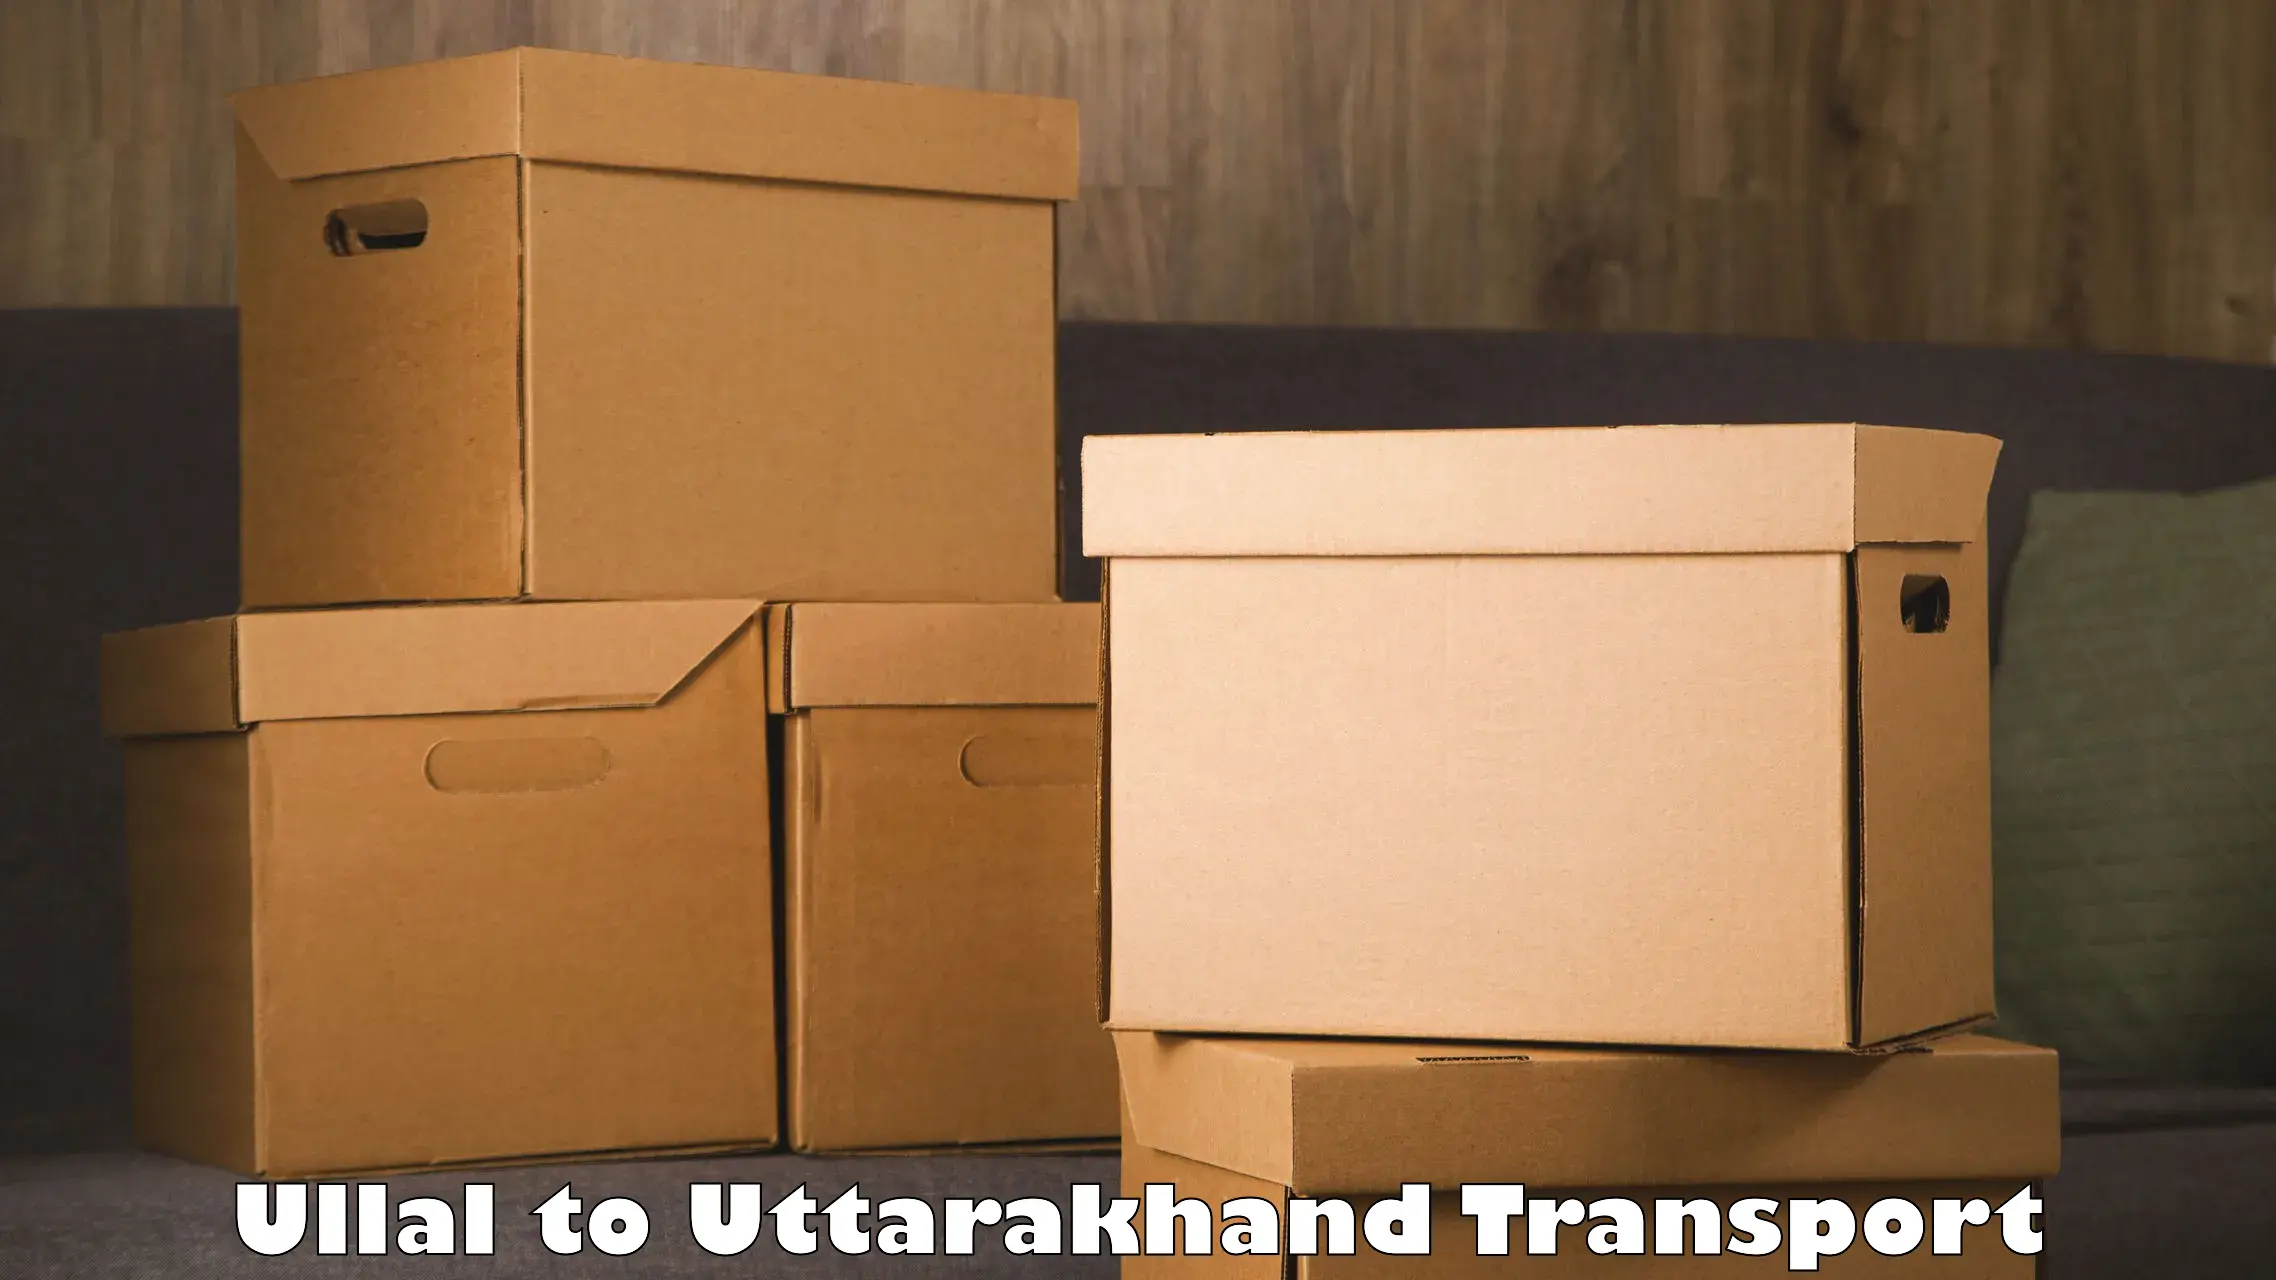 Truck transport companies in India Ullal to Mussoorie